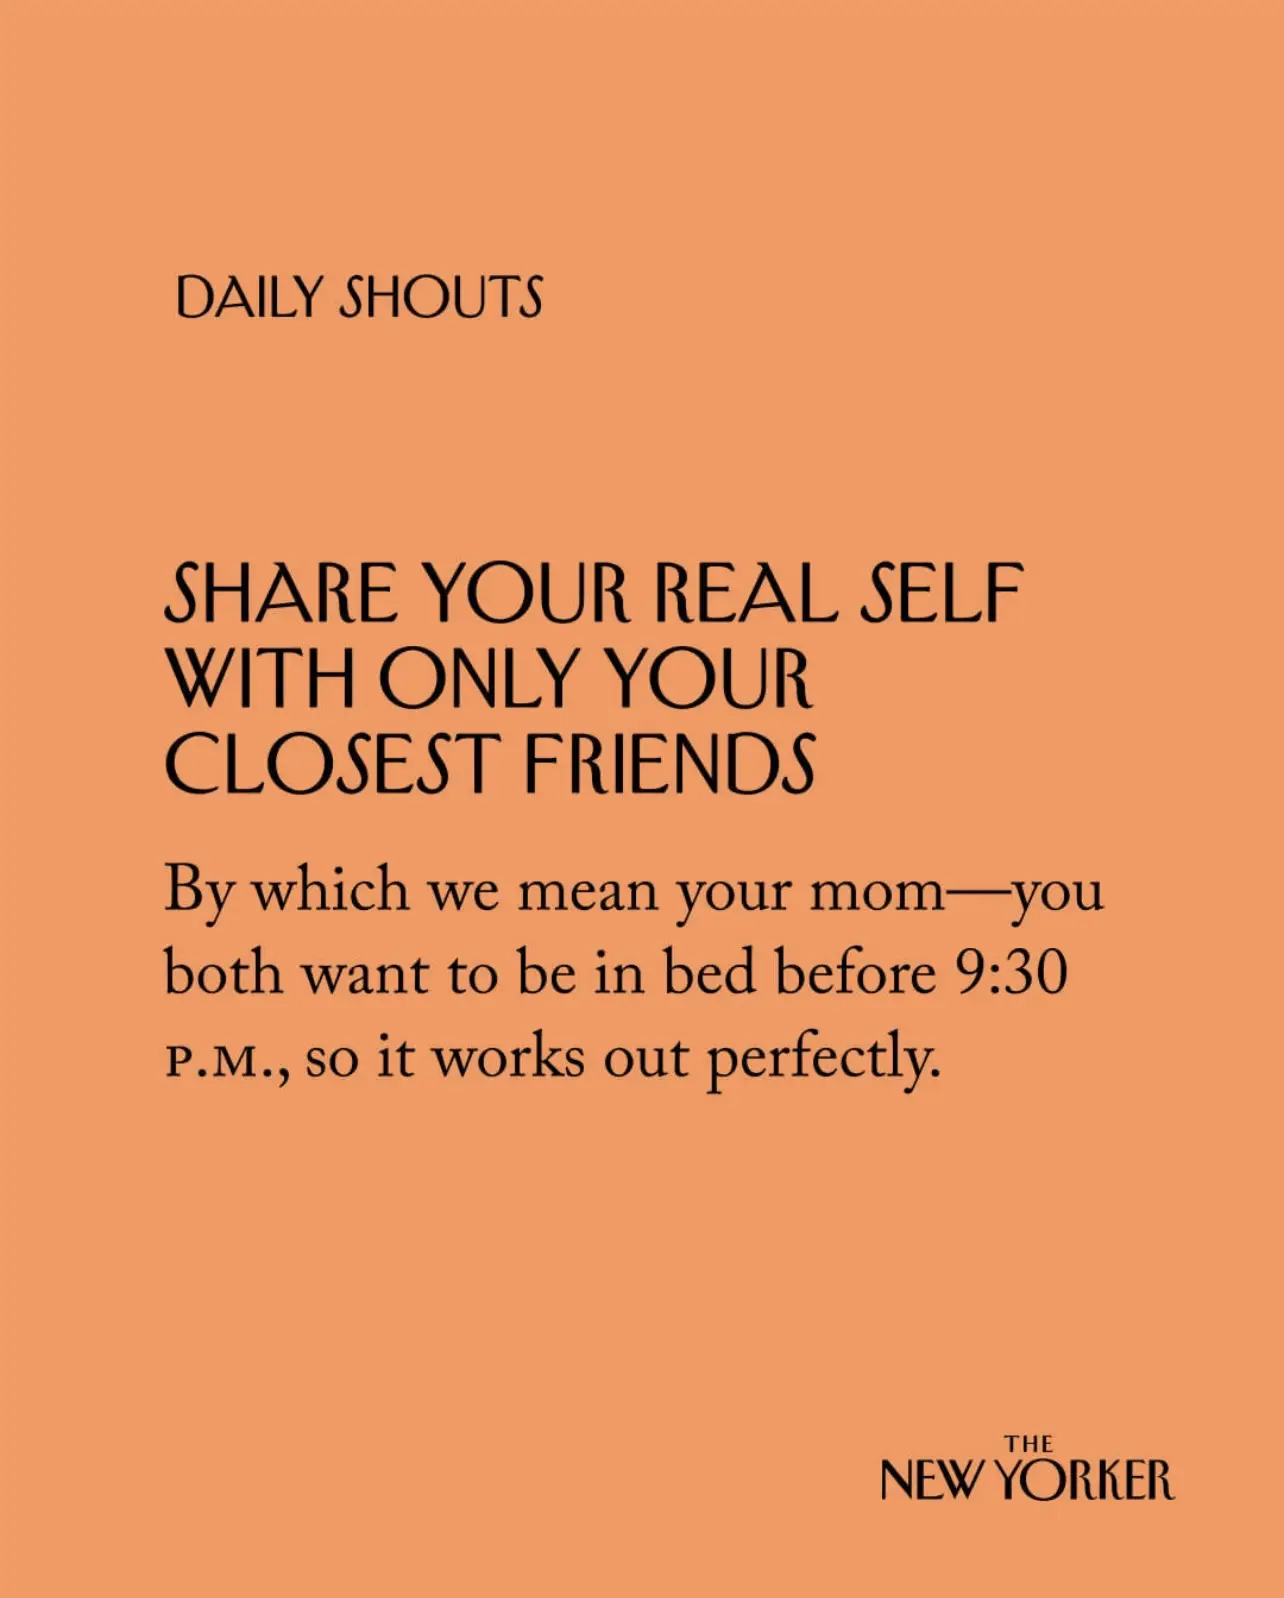  A daily shout out to share your real self with only your closest friends.